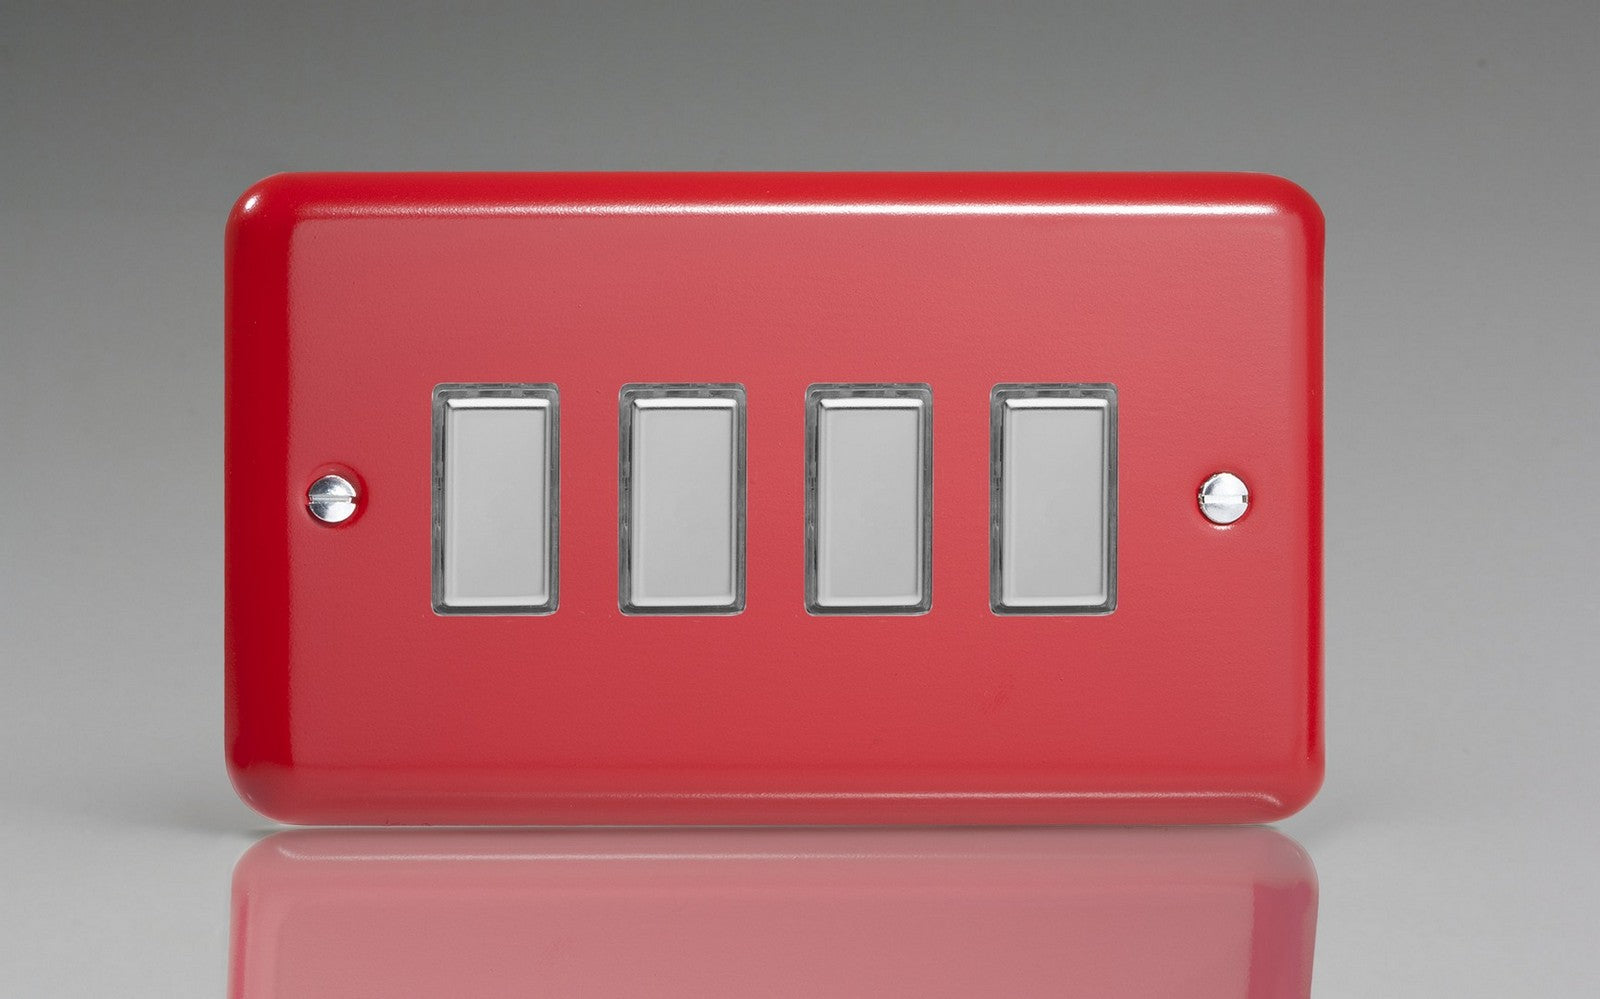 Varilight JYES004.PR Lily Pillar Box Red 4-Gang Tactile Touch Control Dimming Slave for use with Multi-Point Touch or Remote Master on 2-Way Circuits (Twin Plate)